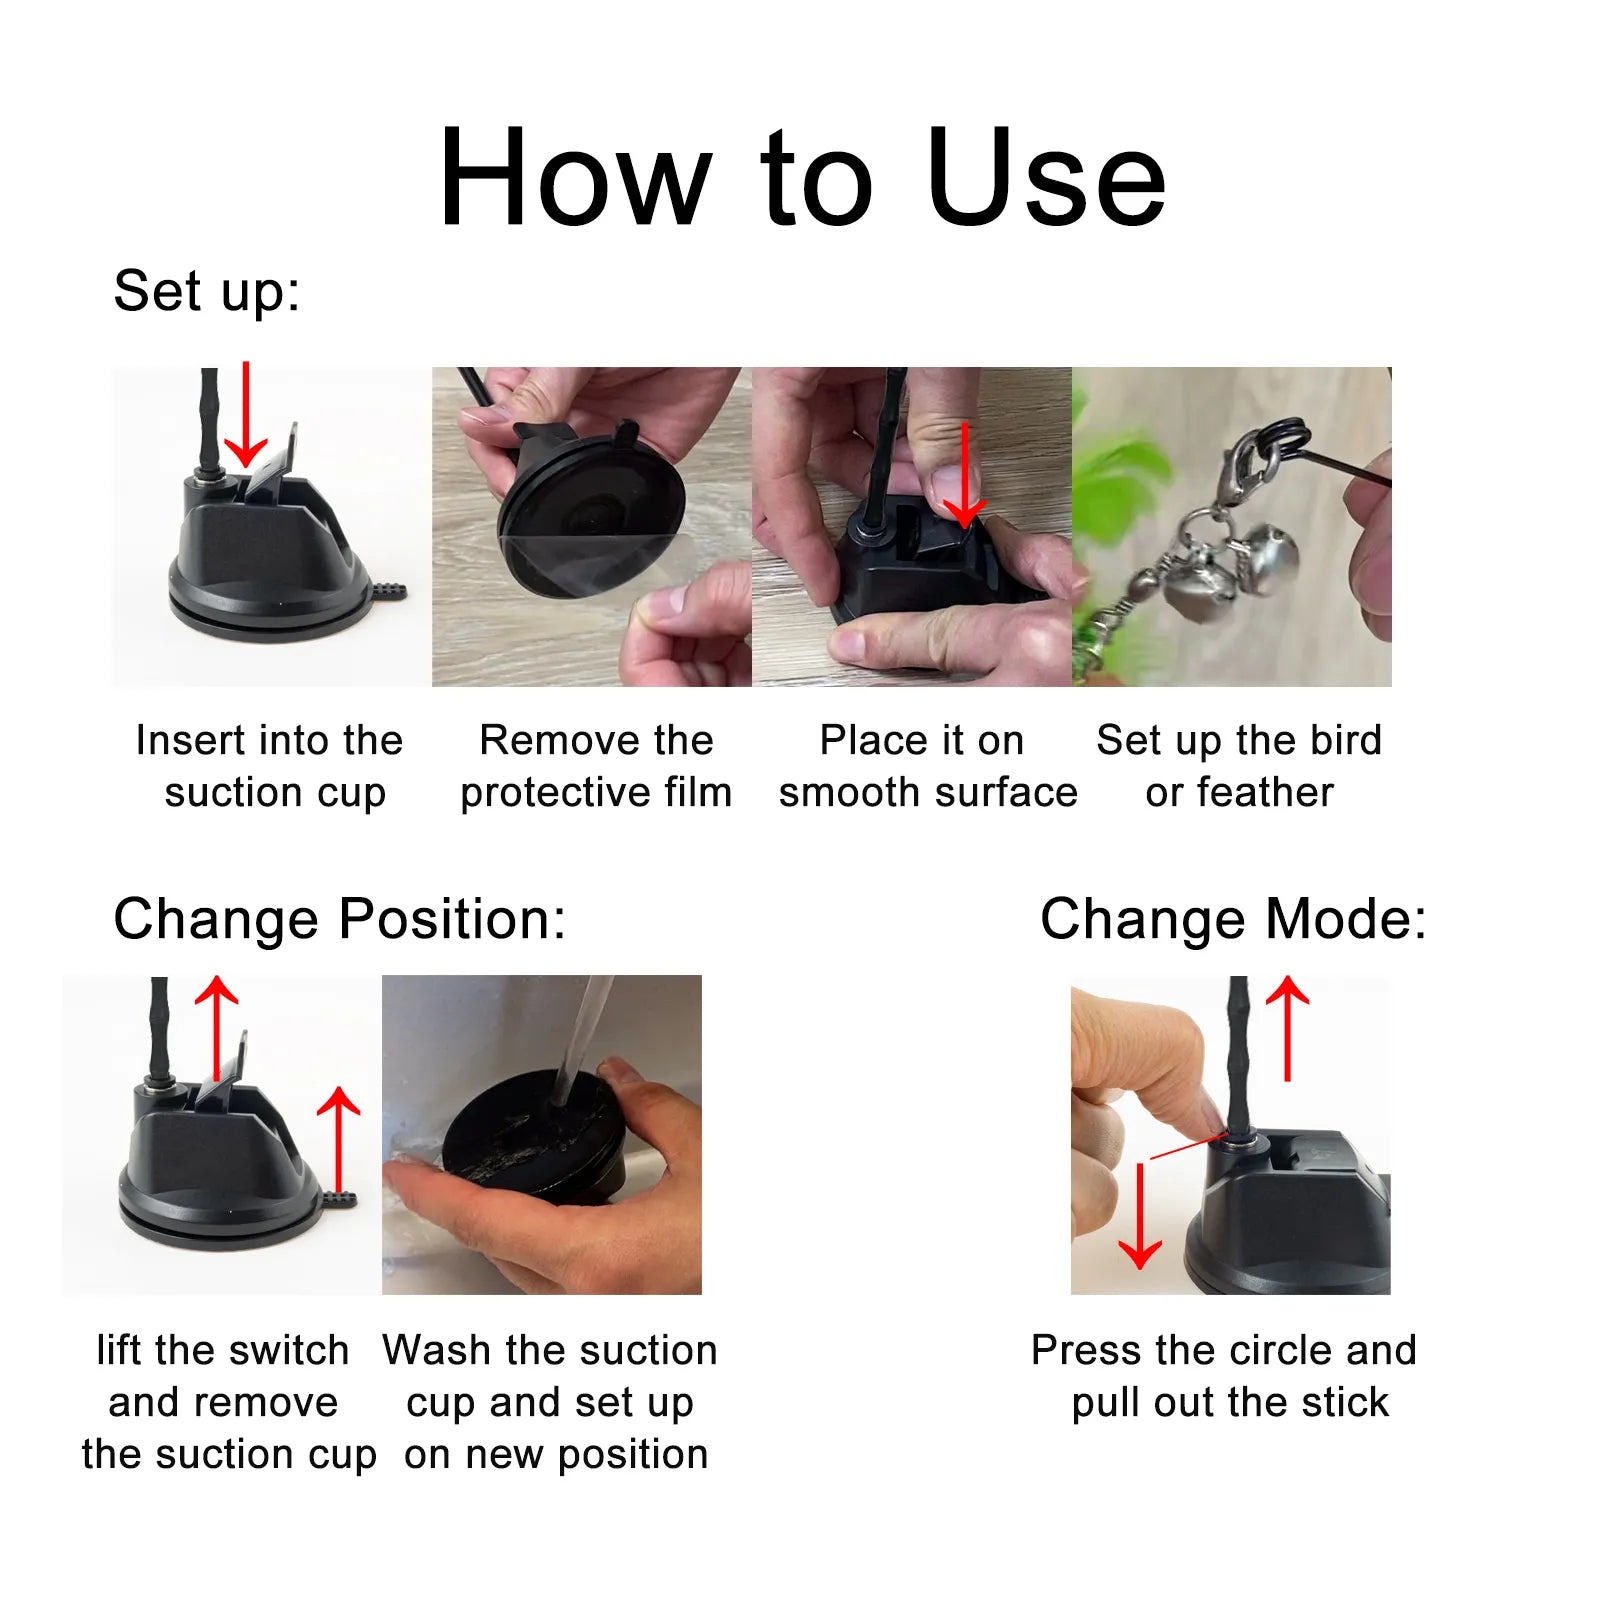 How to use toy